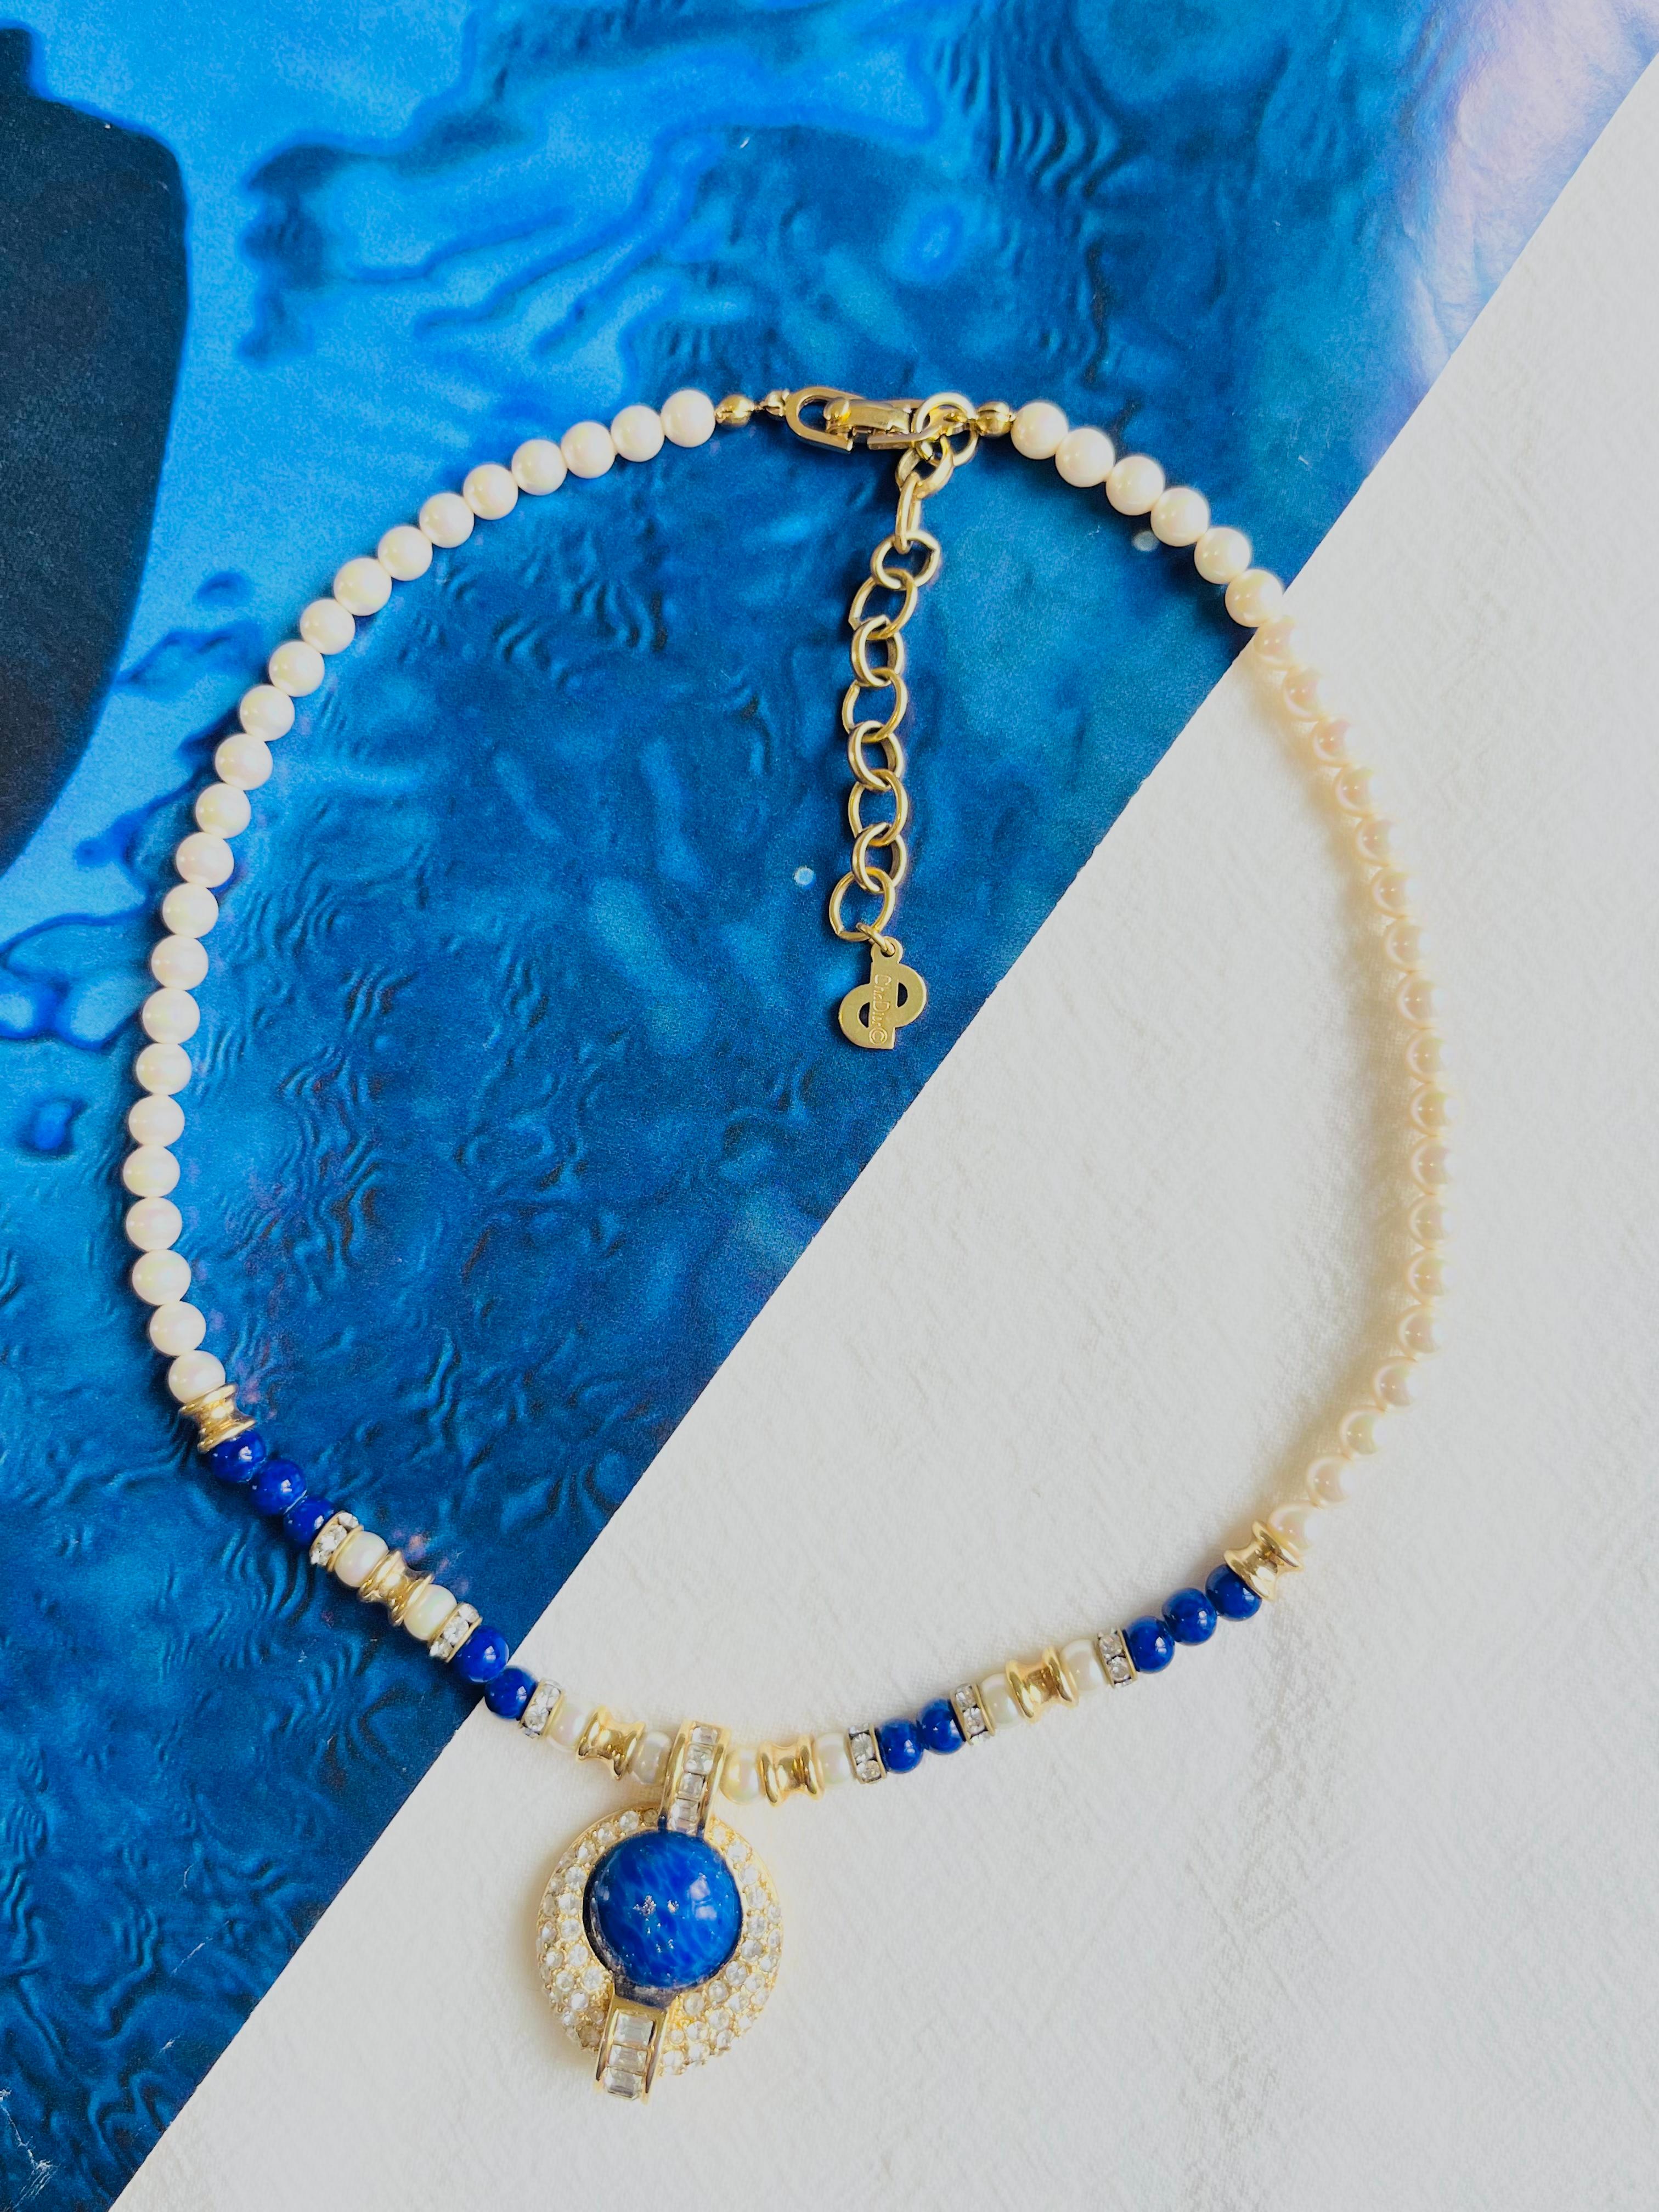 Christian Dior Vintage 1980s White Pearls Lapis Cabochon Sparkling Crystals Oval Round Pendant Necklace, Gold Plated

Very excellent condition. 100% Genuine.

Marked 'Chr.Dior (C) '. Rare to find.

Materials: Gold Plated metal, rhinestones, Faux